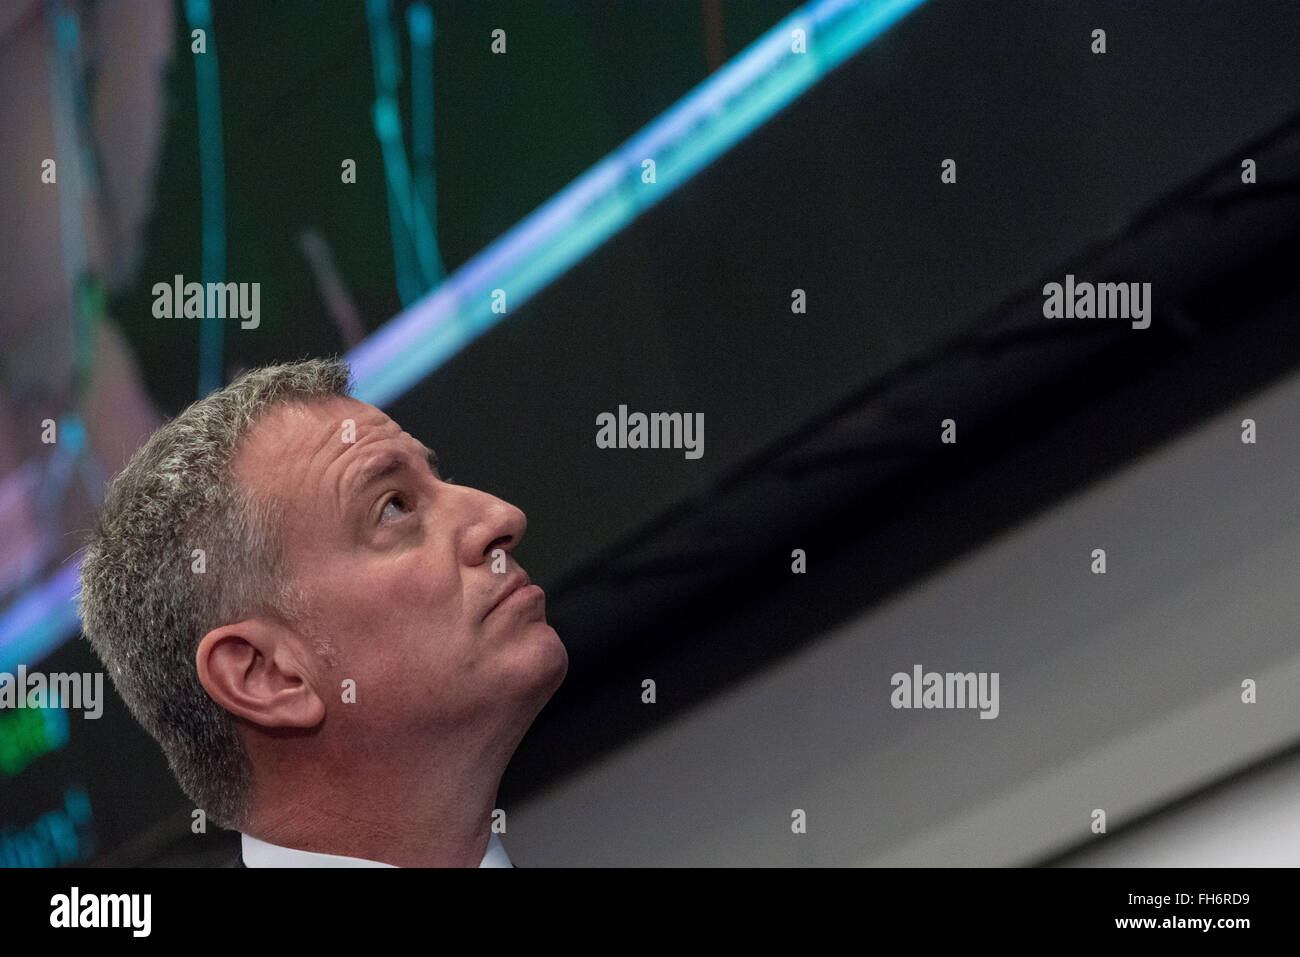 New York, United States. 23rd Feb, 2016. Mayor de Blasio looks toward the overhead monitor during the presentation. NYC Mayor Bill de Blasio and Police Commissioner William Bratton held a press briefing at One Police Plaza, the headquarters of the NYPD, to announce the launch of 'CompStat 2.0,' a new system for both publicly sharing crime data and enabling much accelerated distribution of vital police information resources among officers in the field. Credit:  Albin Lohr-Jones/Pacific Press/Alamy Live News Stock Photo